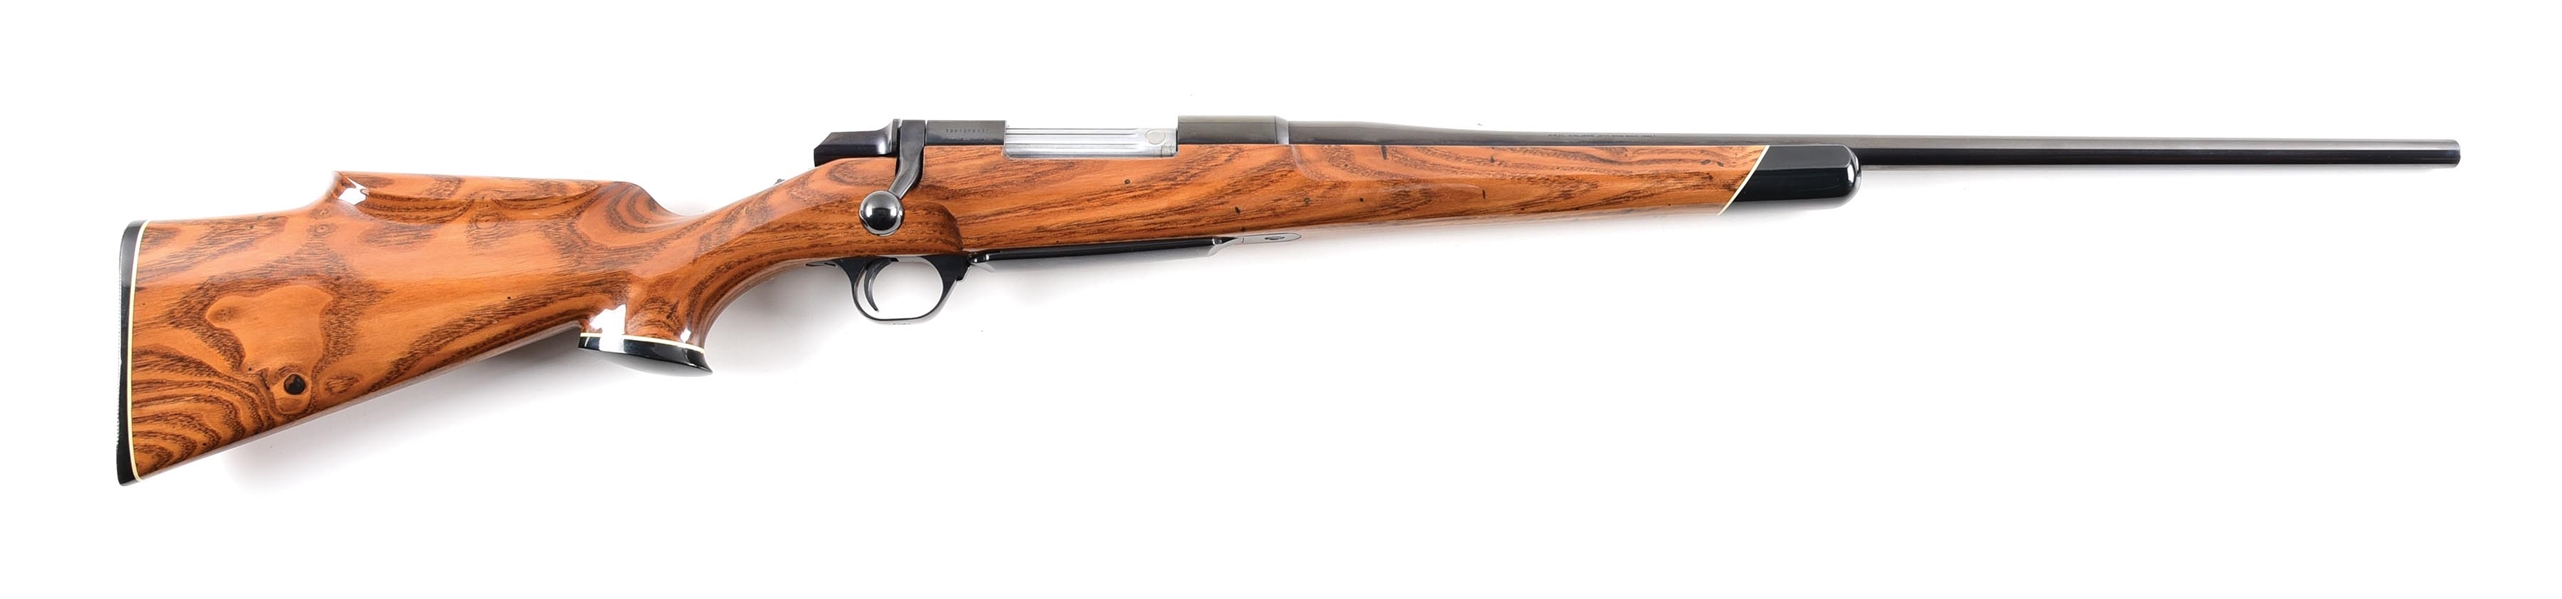 (M) BROWNING BBR BOLT ACTION RIFLE WITH CHESTNUT CASTANEA DENTATA STOCK.